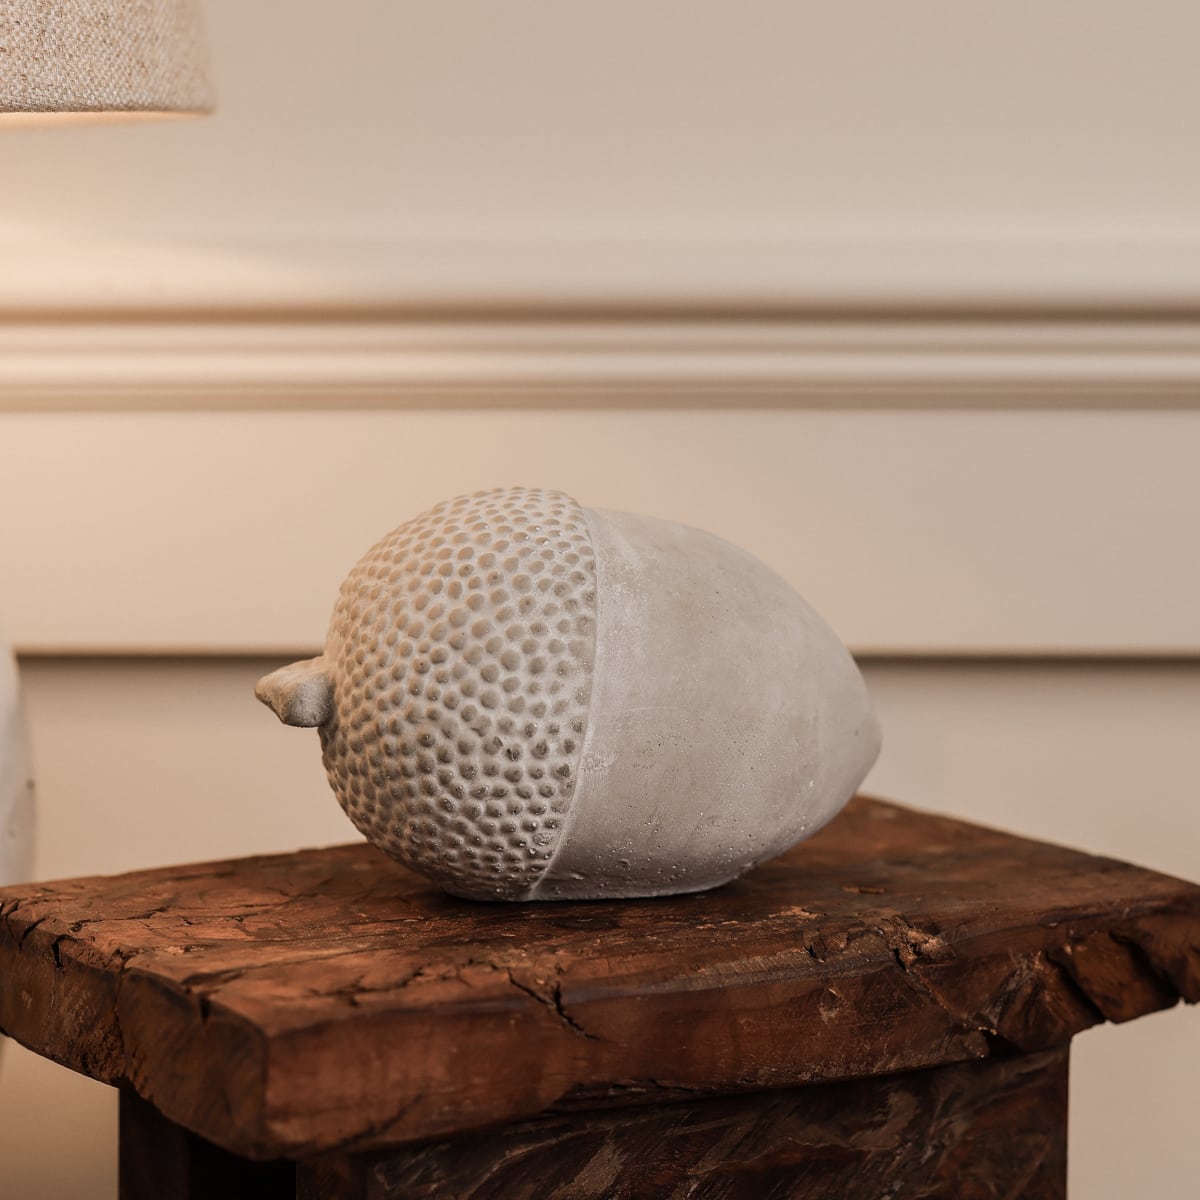 Cement acorn ornament on wooden stool.